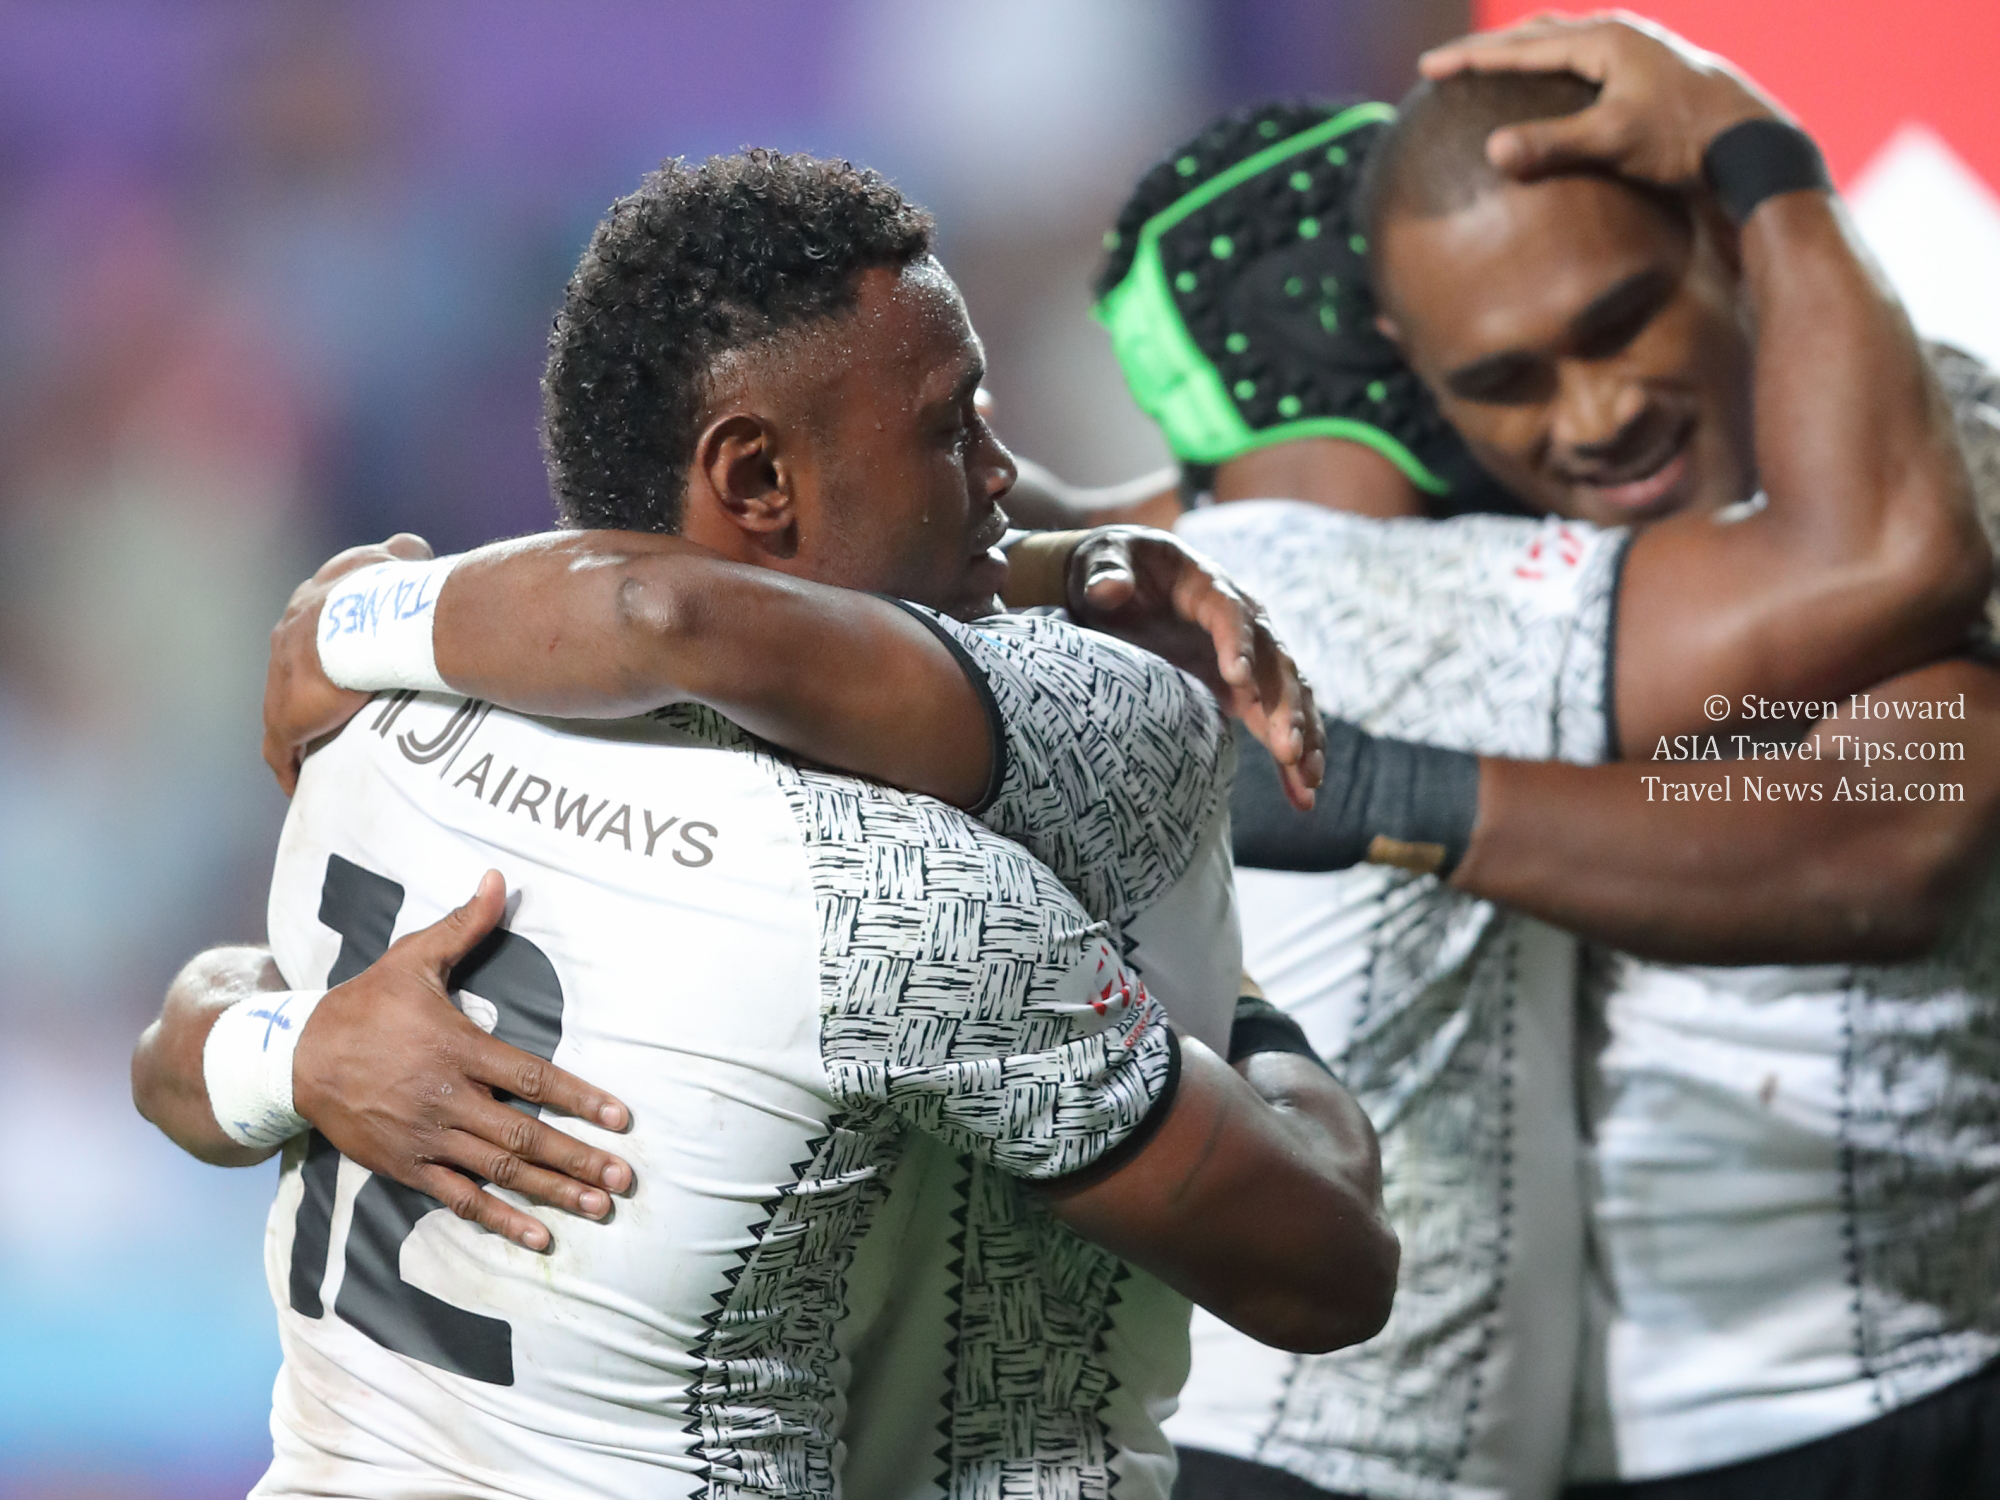 Fiji Rugby Sevens team celebrate victory at Cathay Pacific / HSBC Hong Kong Sevens in 2018. Picture by Steven Howard of TravelNewsAsia.com Click to enlarge.